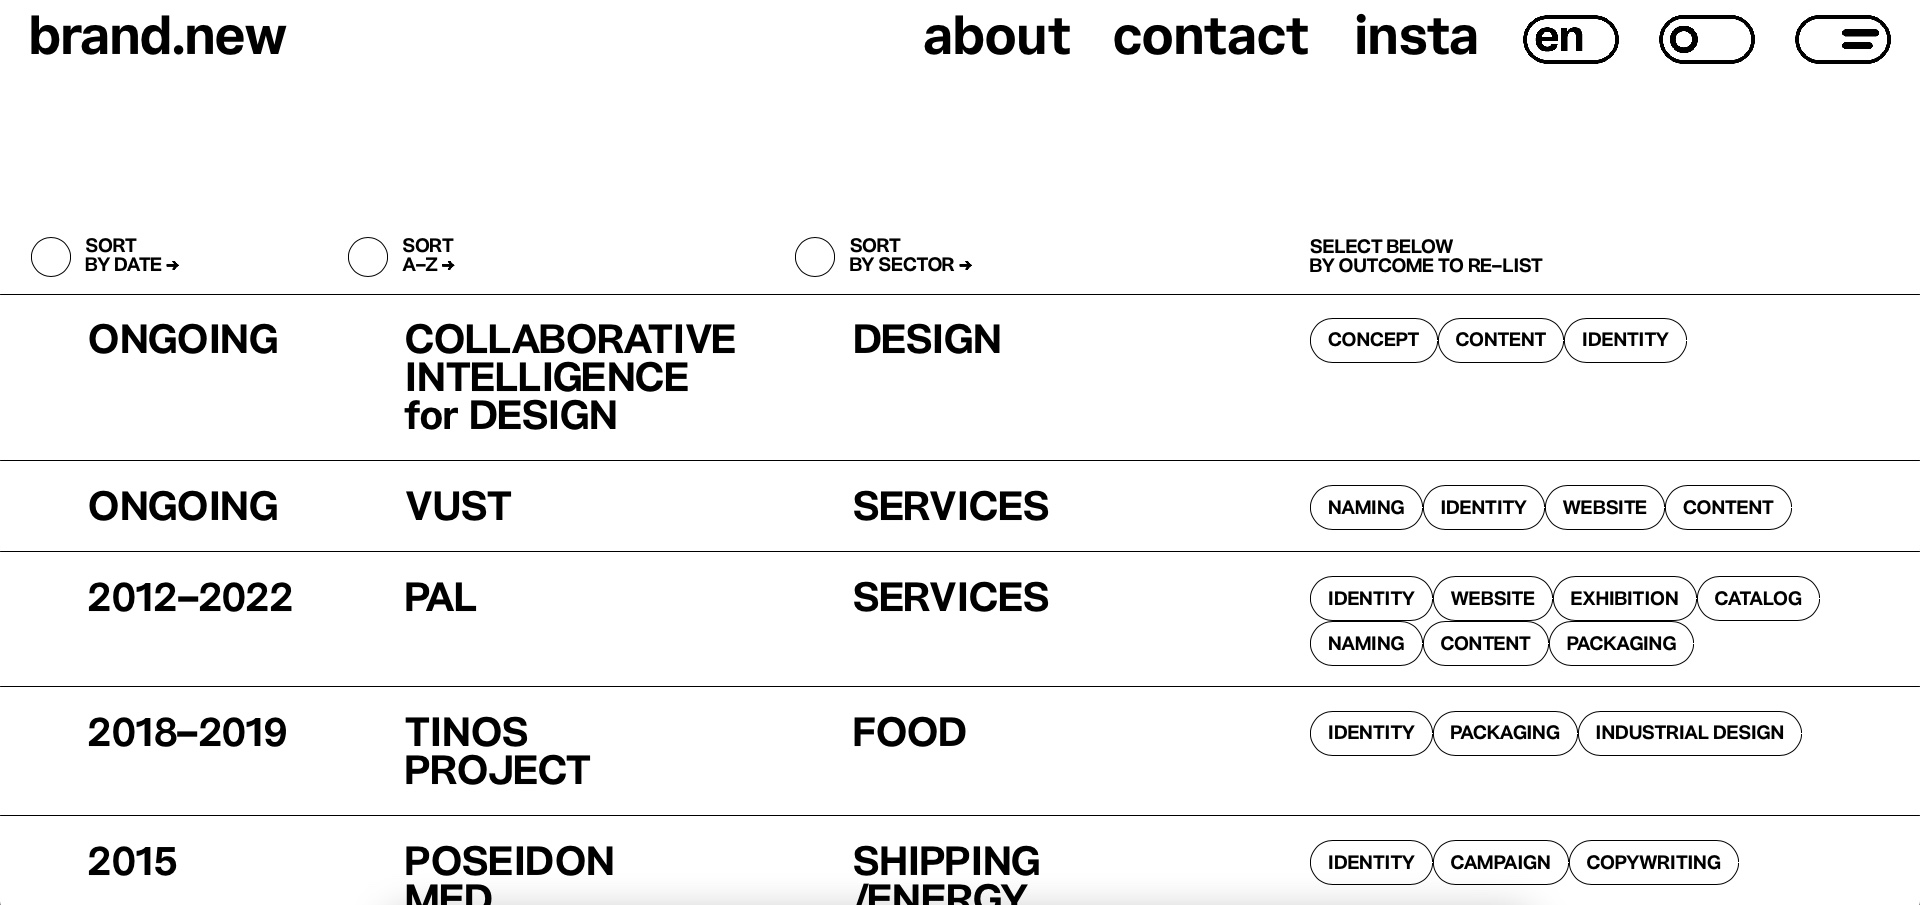 The index page of brand.new